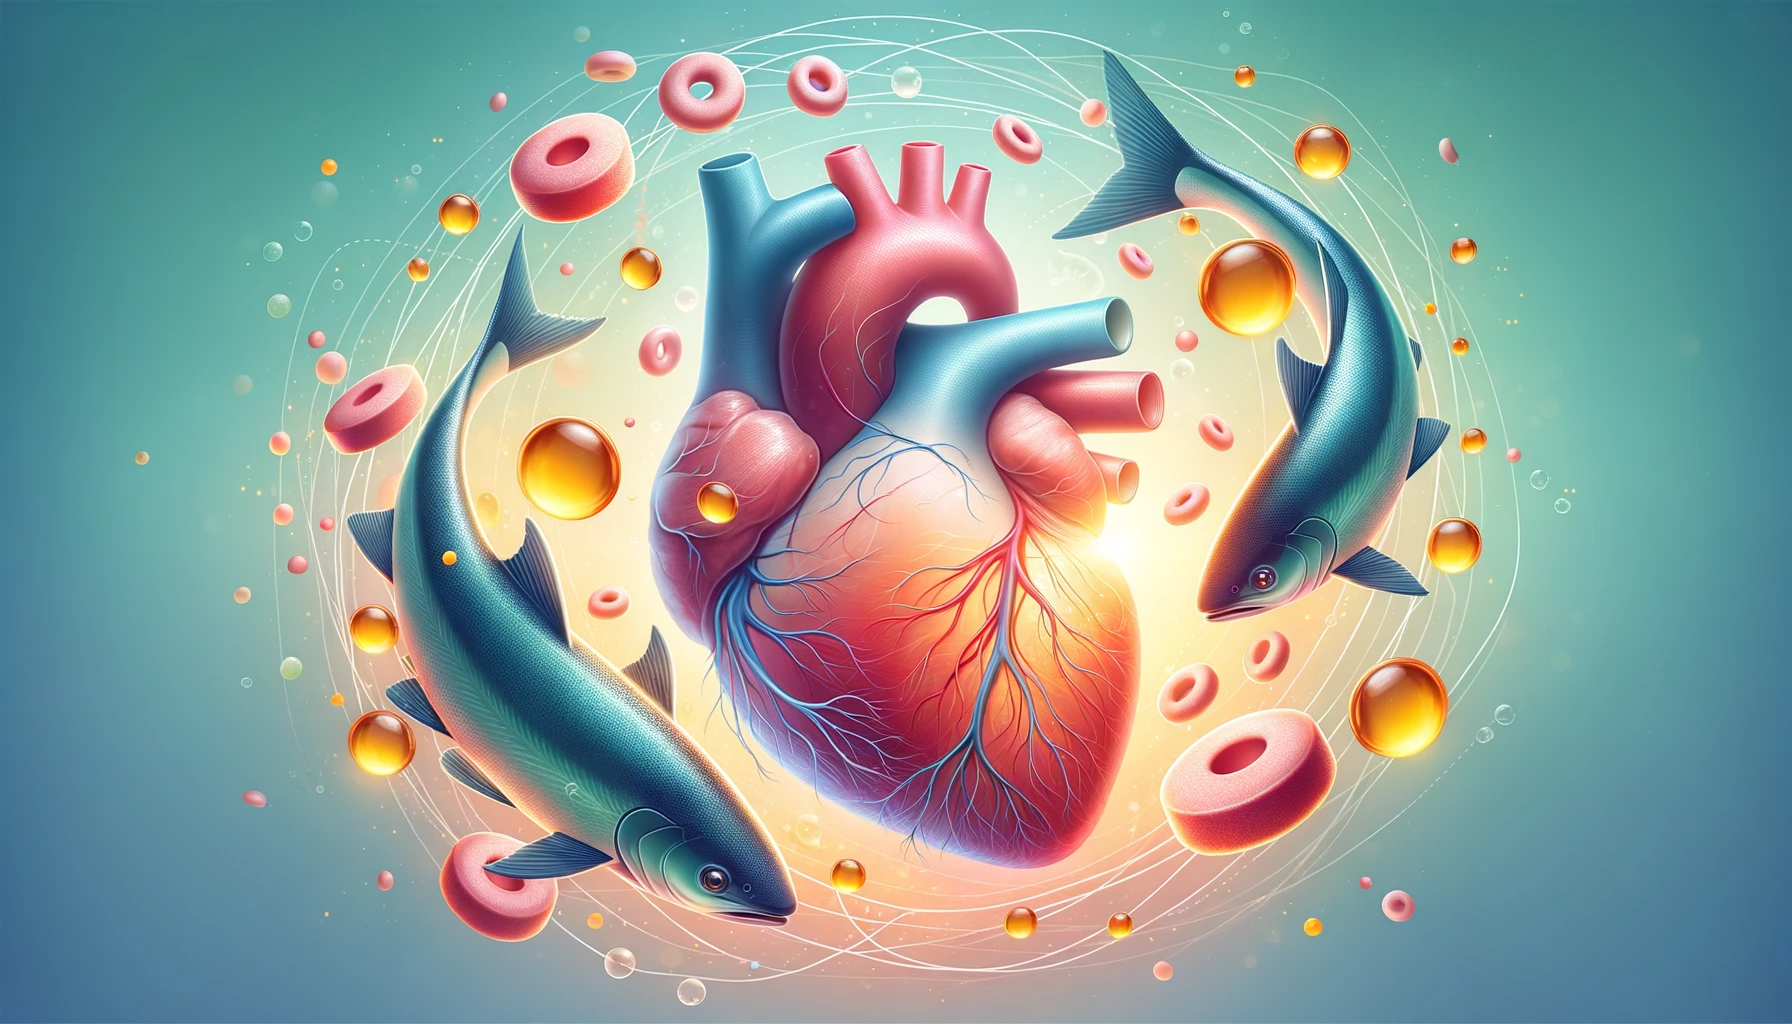 An illustration of a human heart intertwined with fish and omega-3 molecules, symbolizing the cardiovascular benefits of consuming fatty fish.